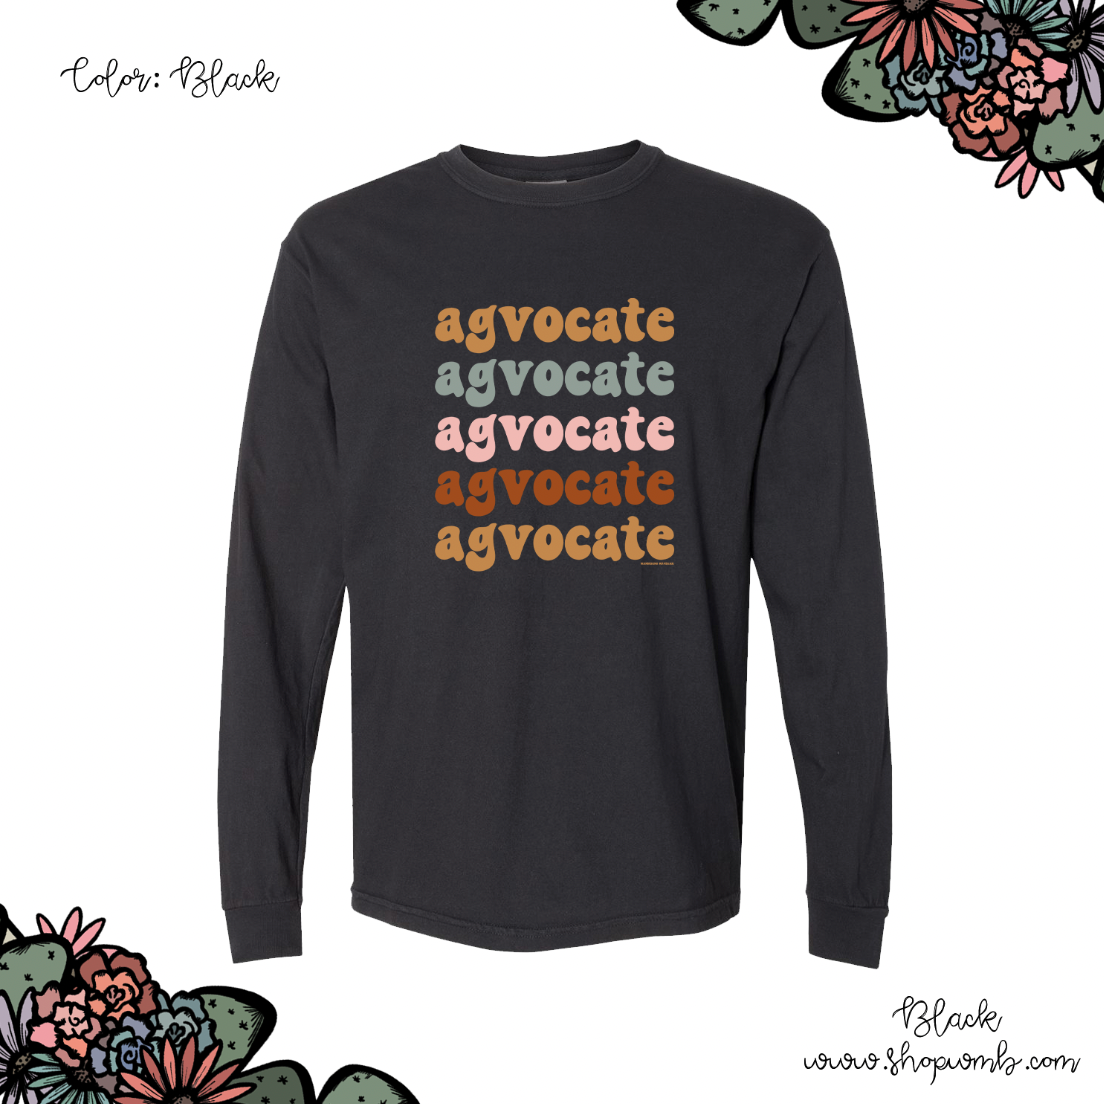 Groovy Agvocate LONG SLEEVE T-Shirt (S-3XL) - Multiple Colors!